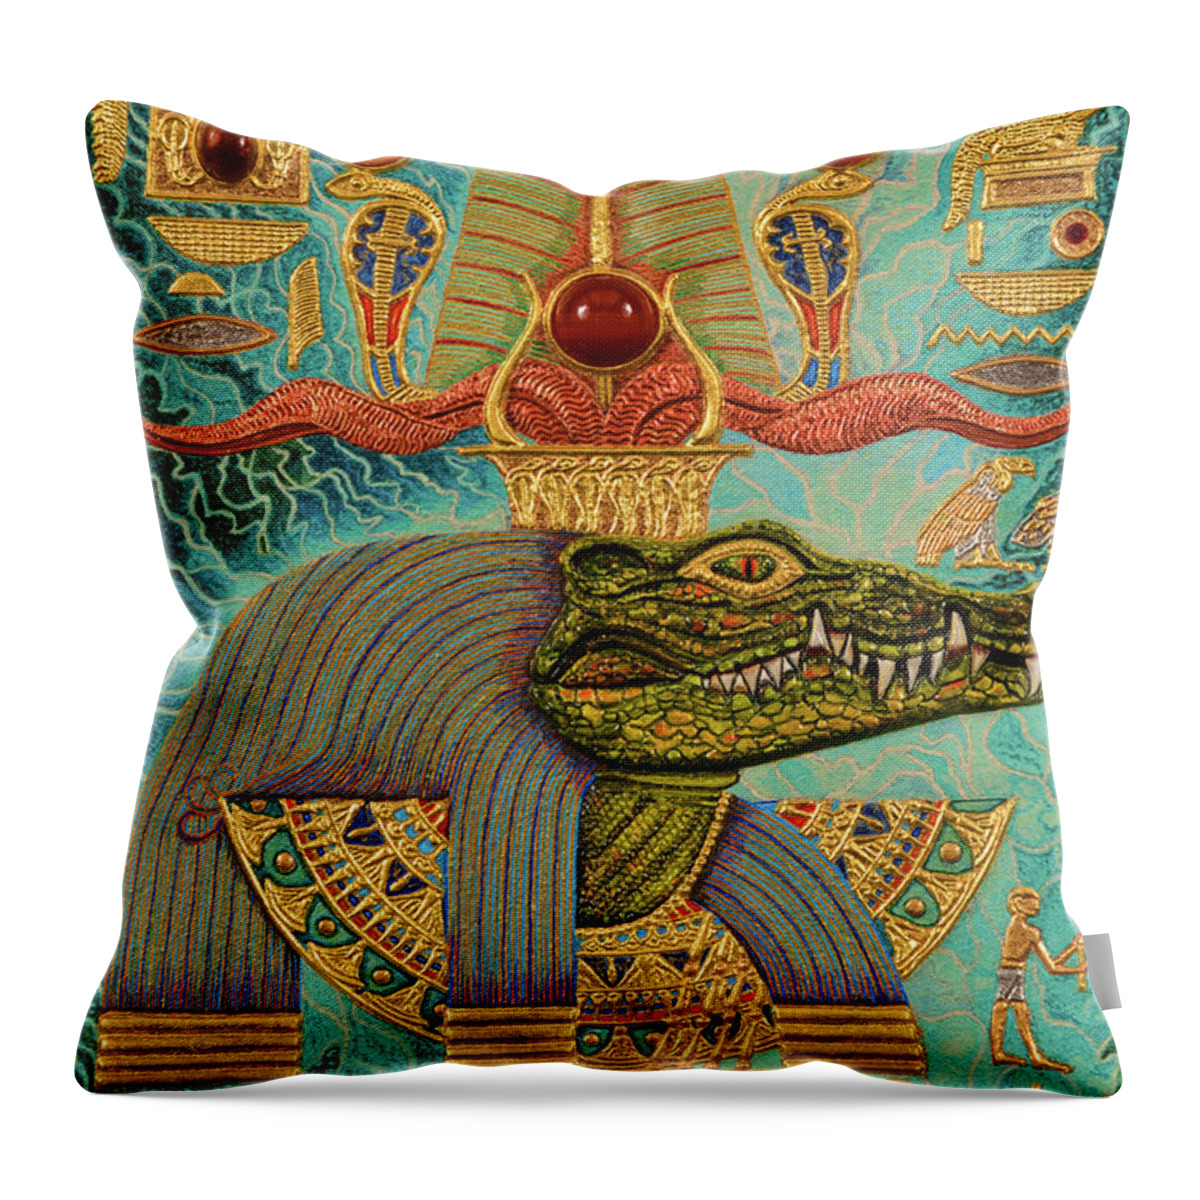 Ancient Throw Pillow featuring the mixed media Akem-Shield of Sobek-Ra Lord of Terror by Ptahmassu Nofra-Uaa